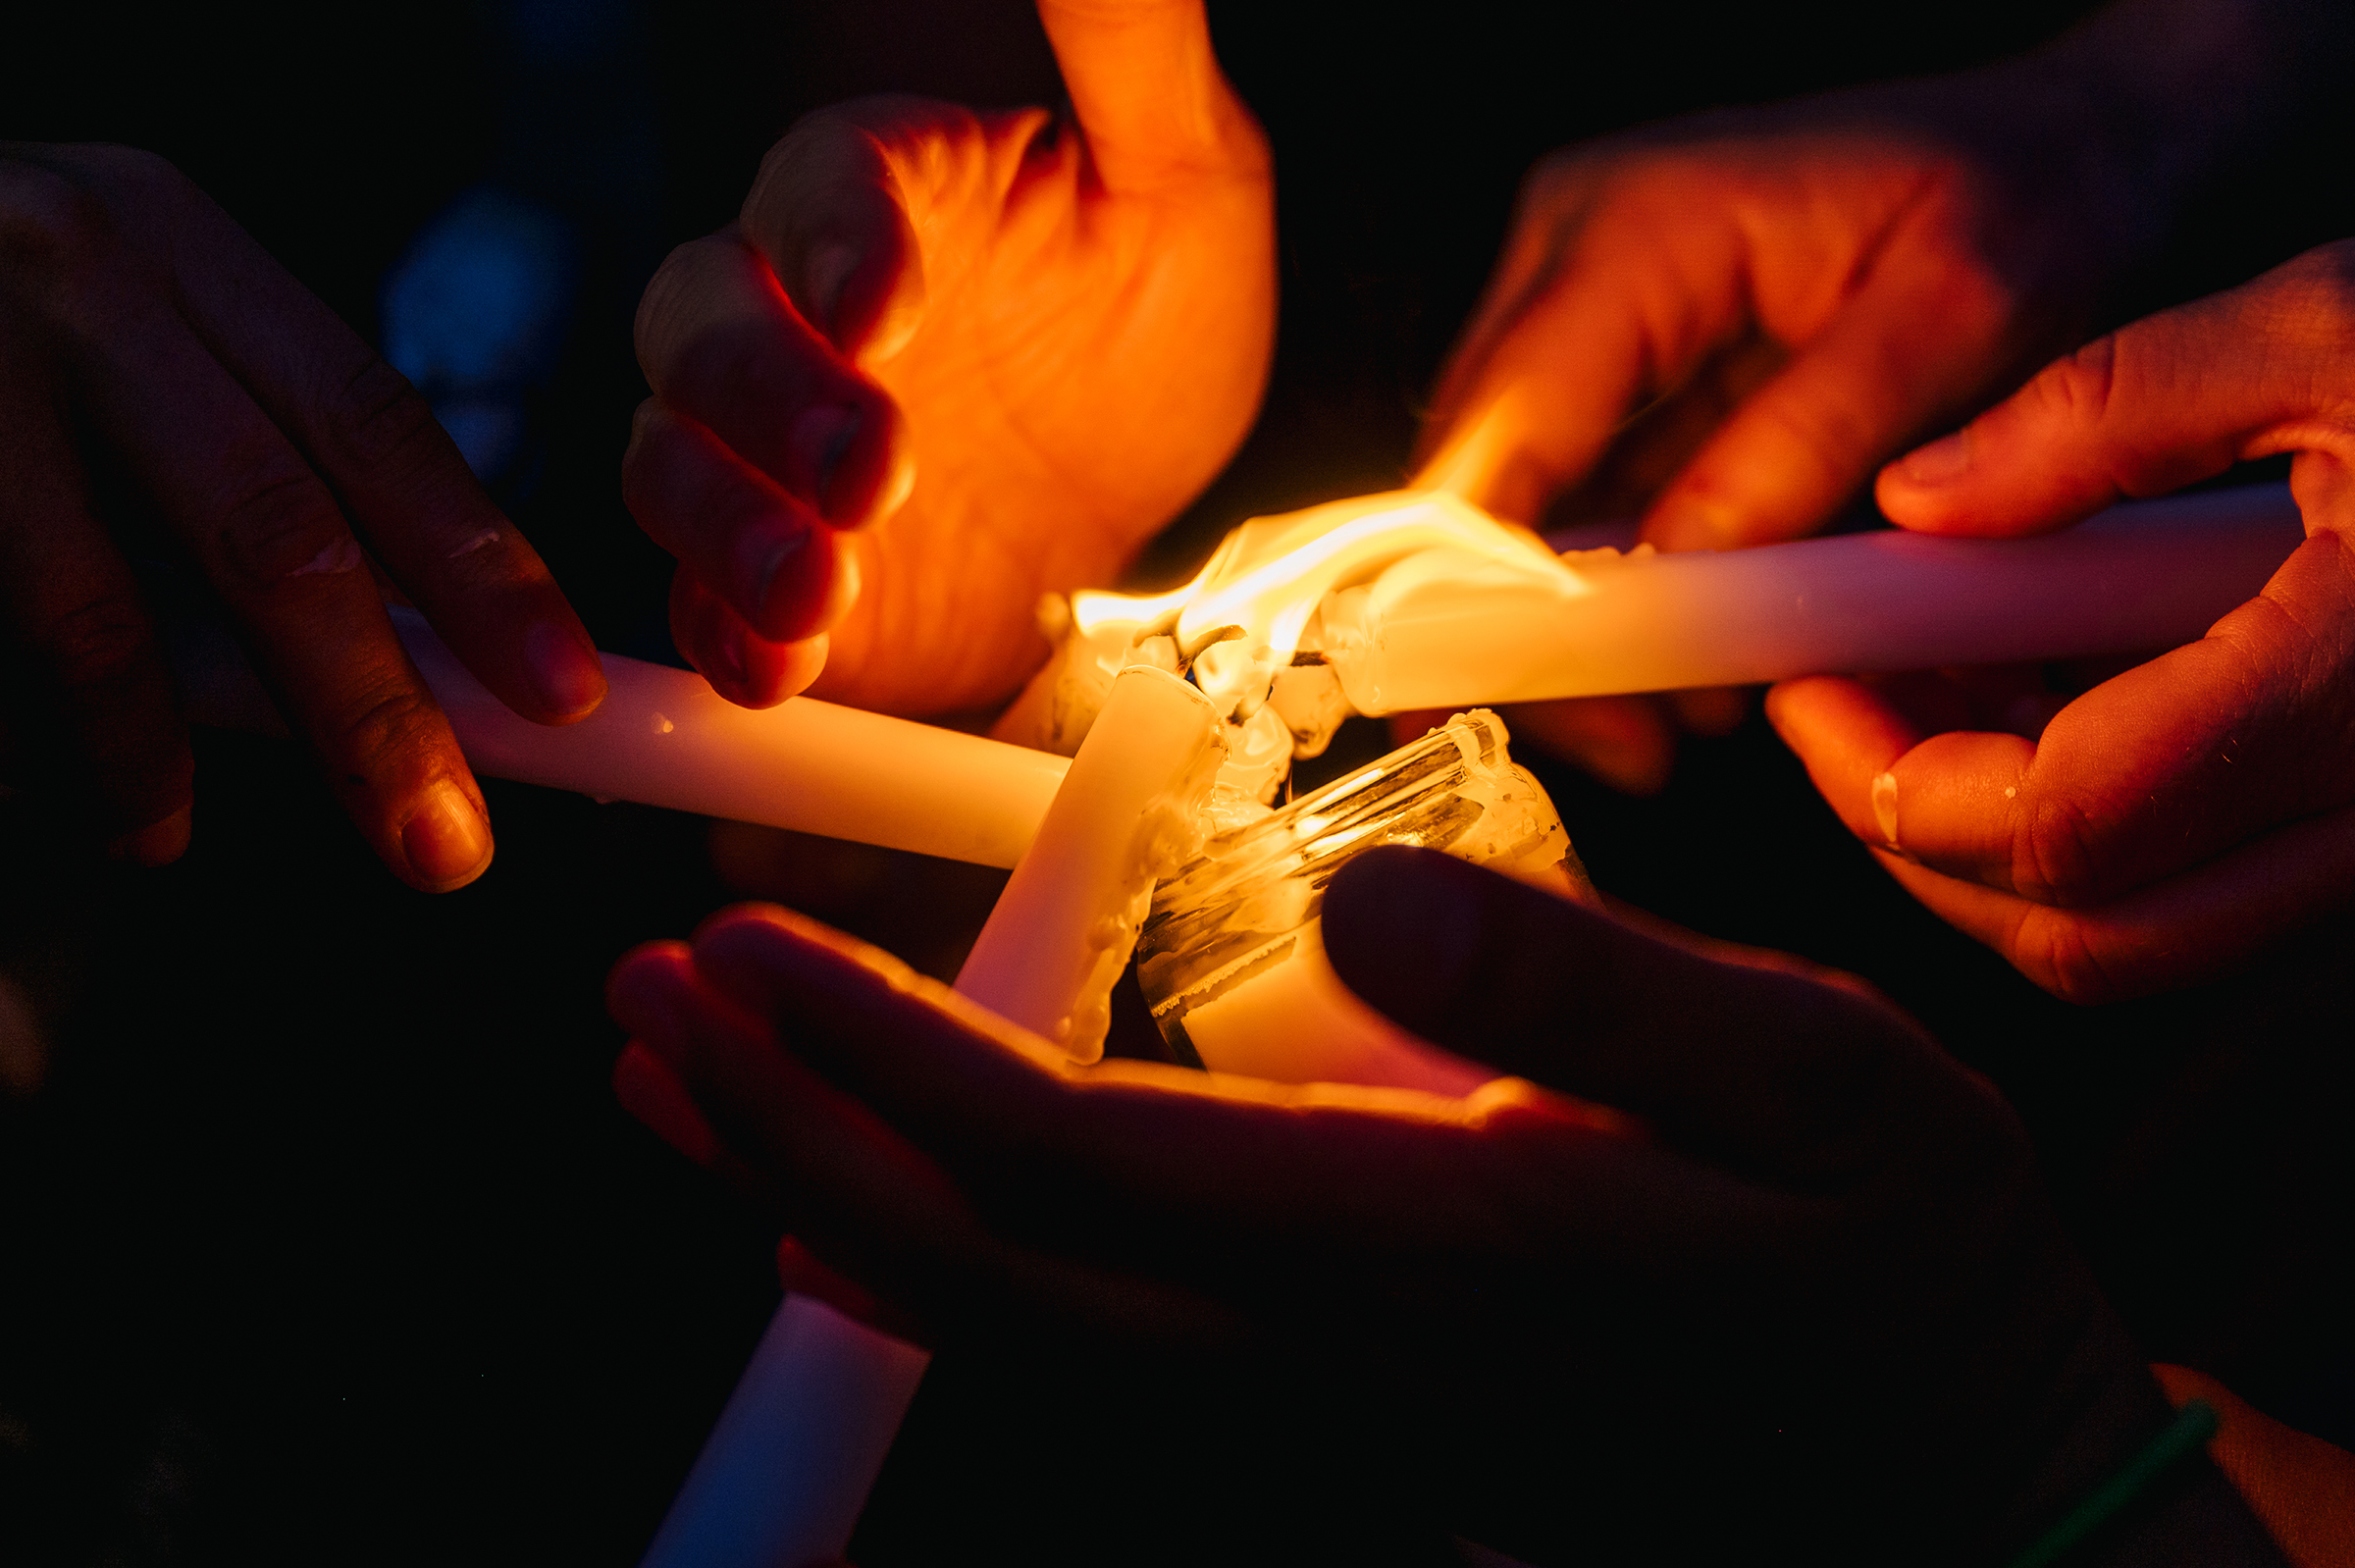 People celebrate the life of George Floyd by lighting candles at the intersection of 38th Street and Chicago Avenue on May 25, 2021, in Minneapolis. (Brandon Bell/Getty Images)